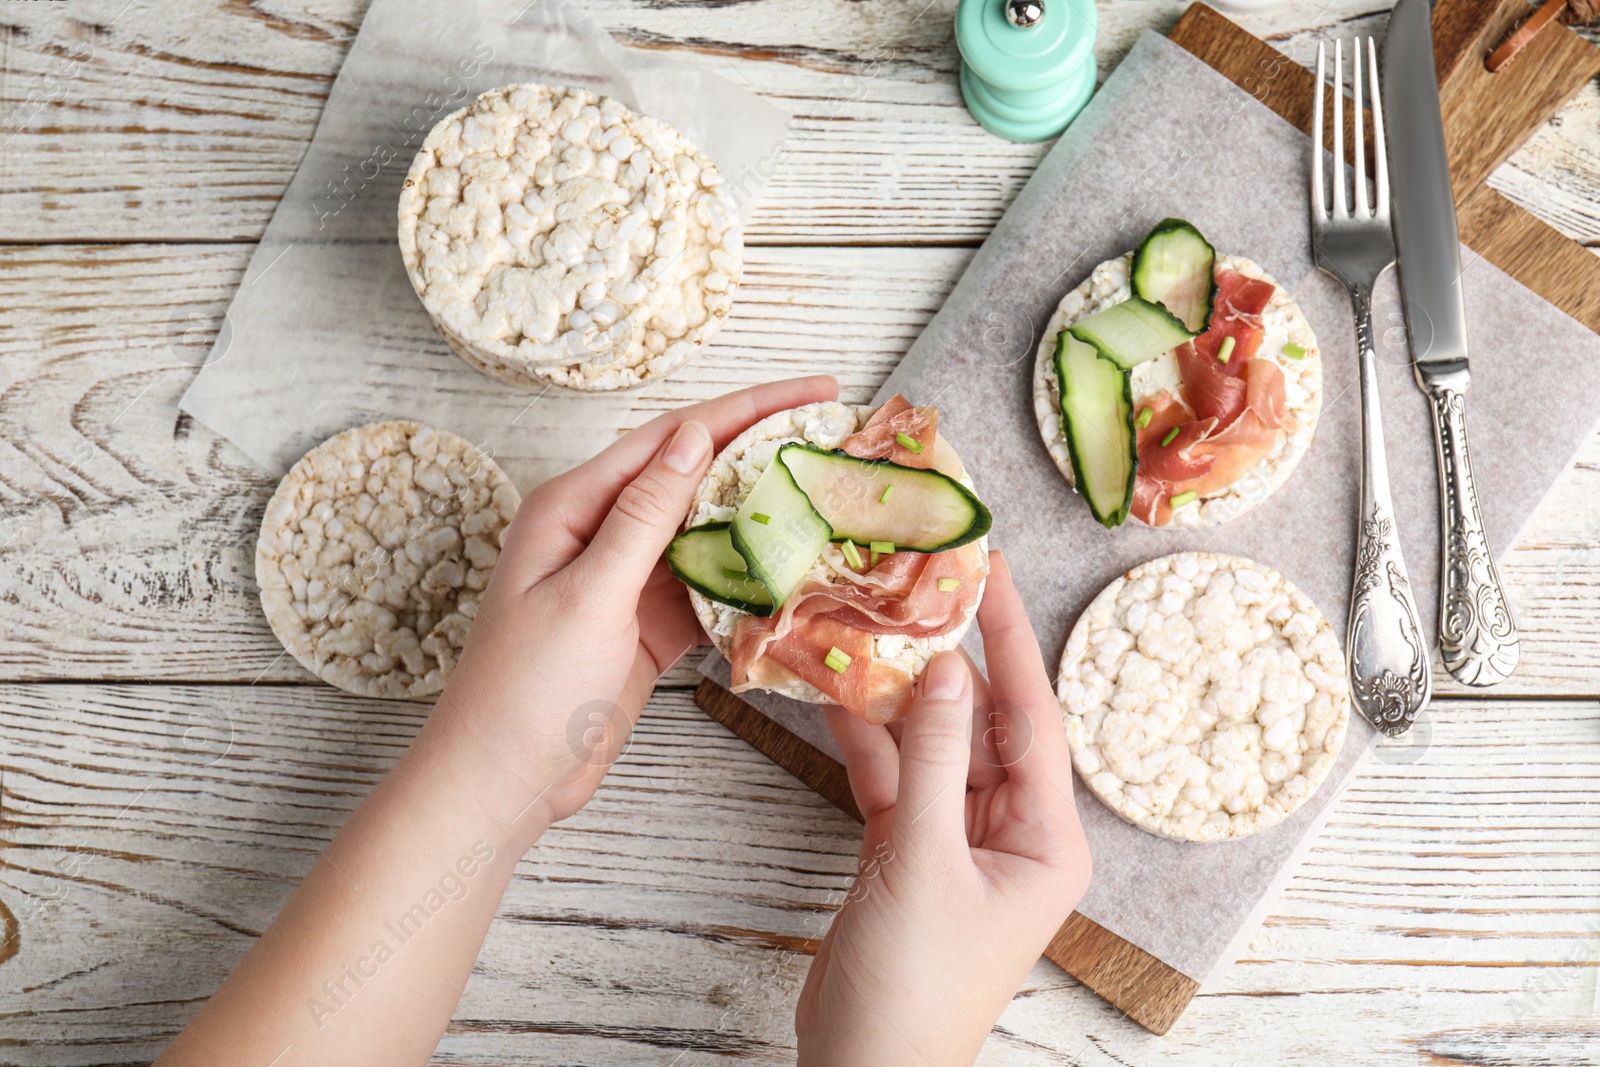 Photo of Woman holding puffed rice cake with prosciutto and cucumber at white wooden table, top view